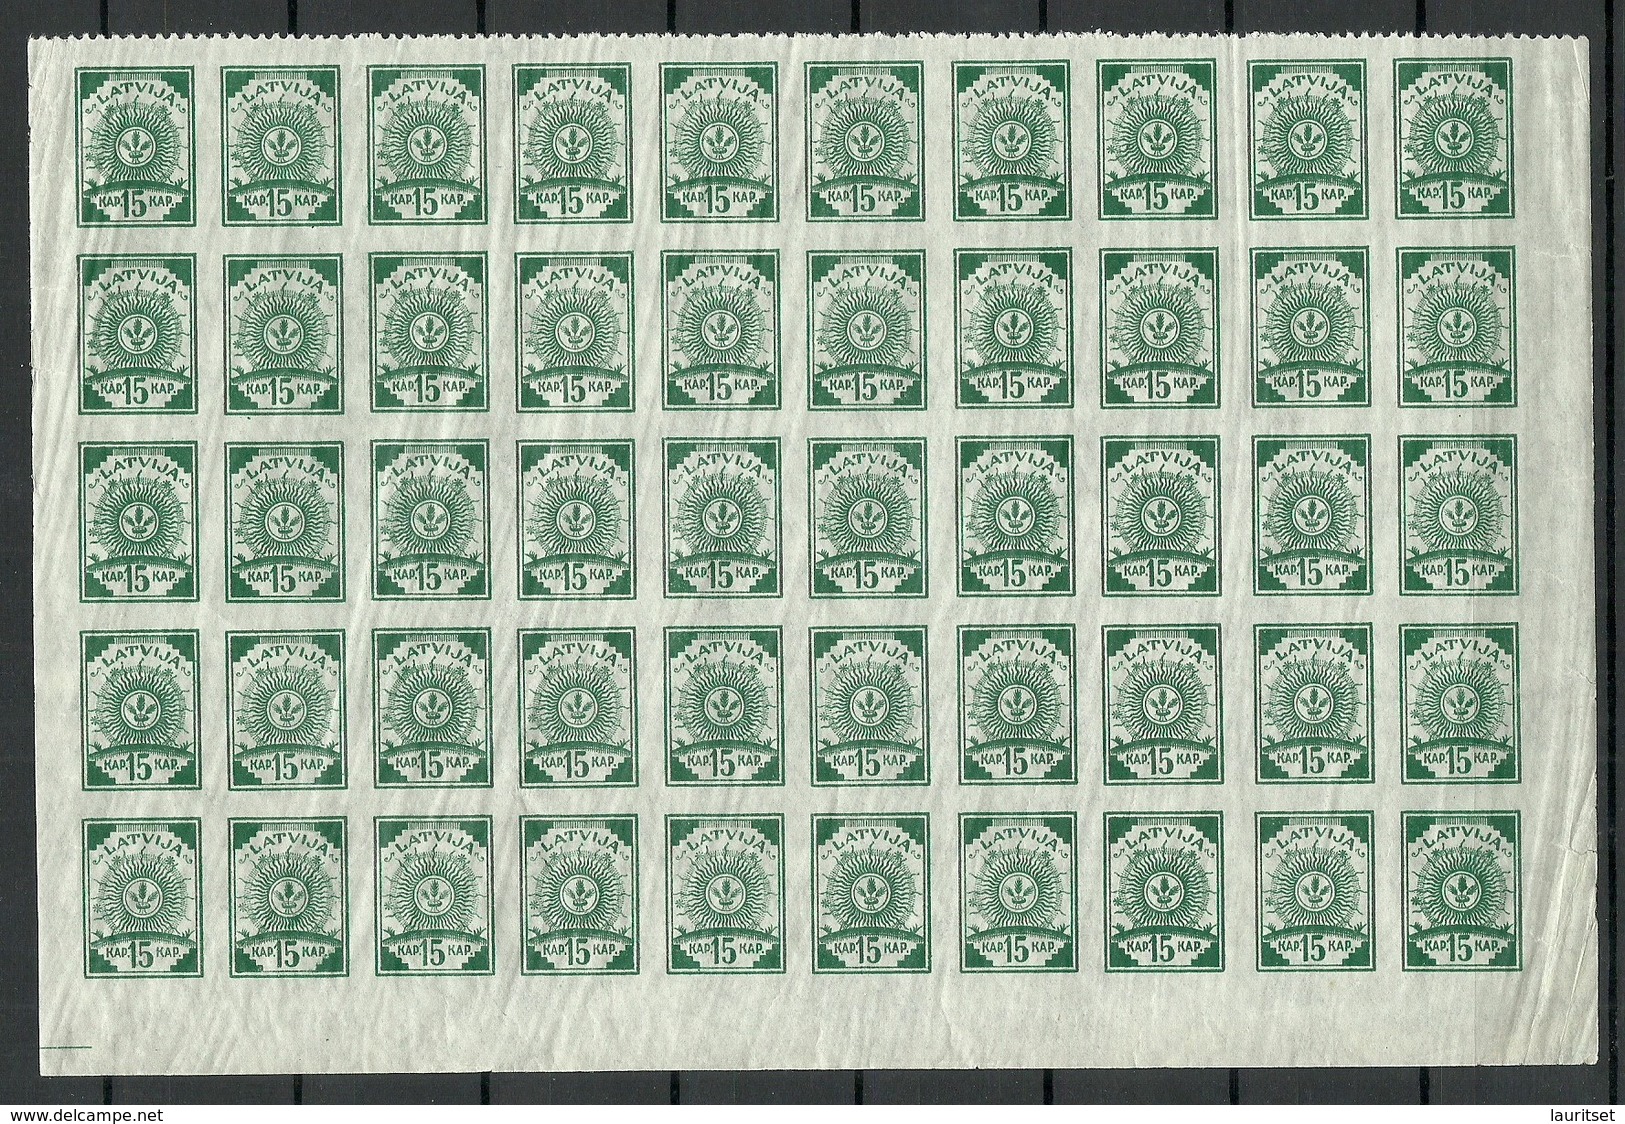 LETTLAND Latvia 1919 Michel 9 Half Of Sheet Of 50 MNH Incl Upper Row Perforated 9 3/4 - Lettland